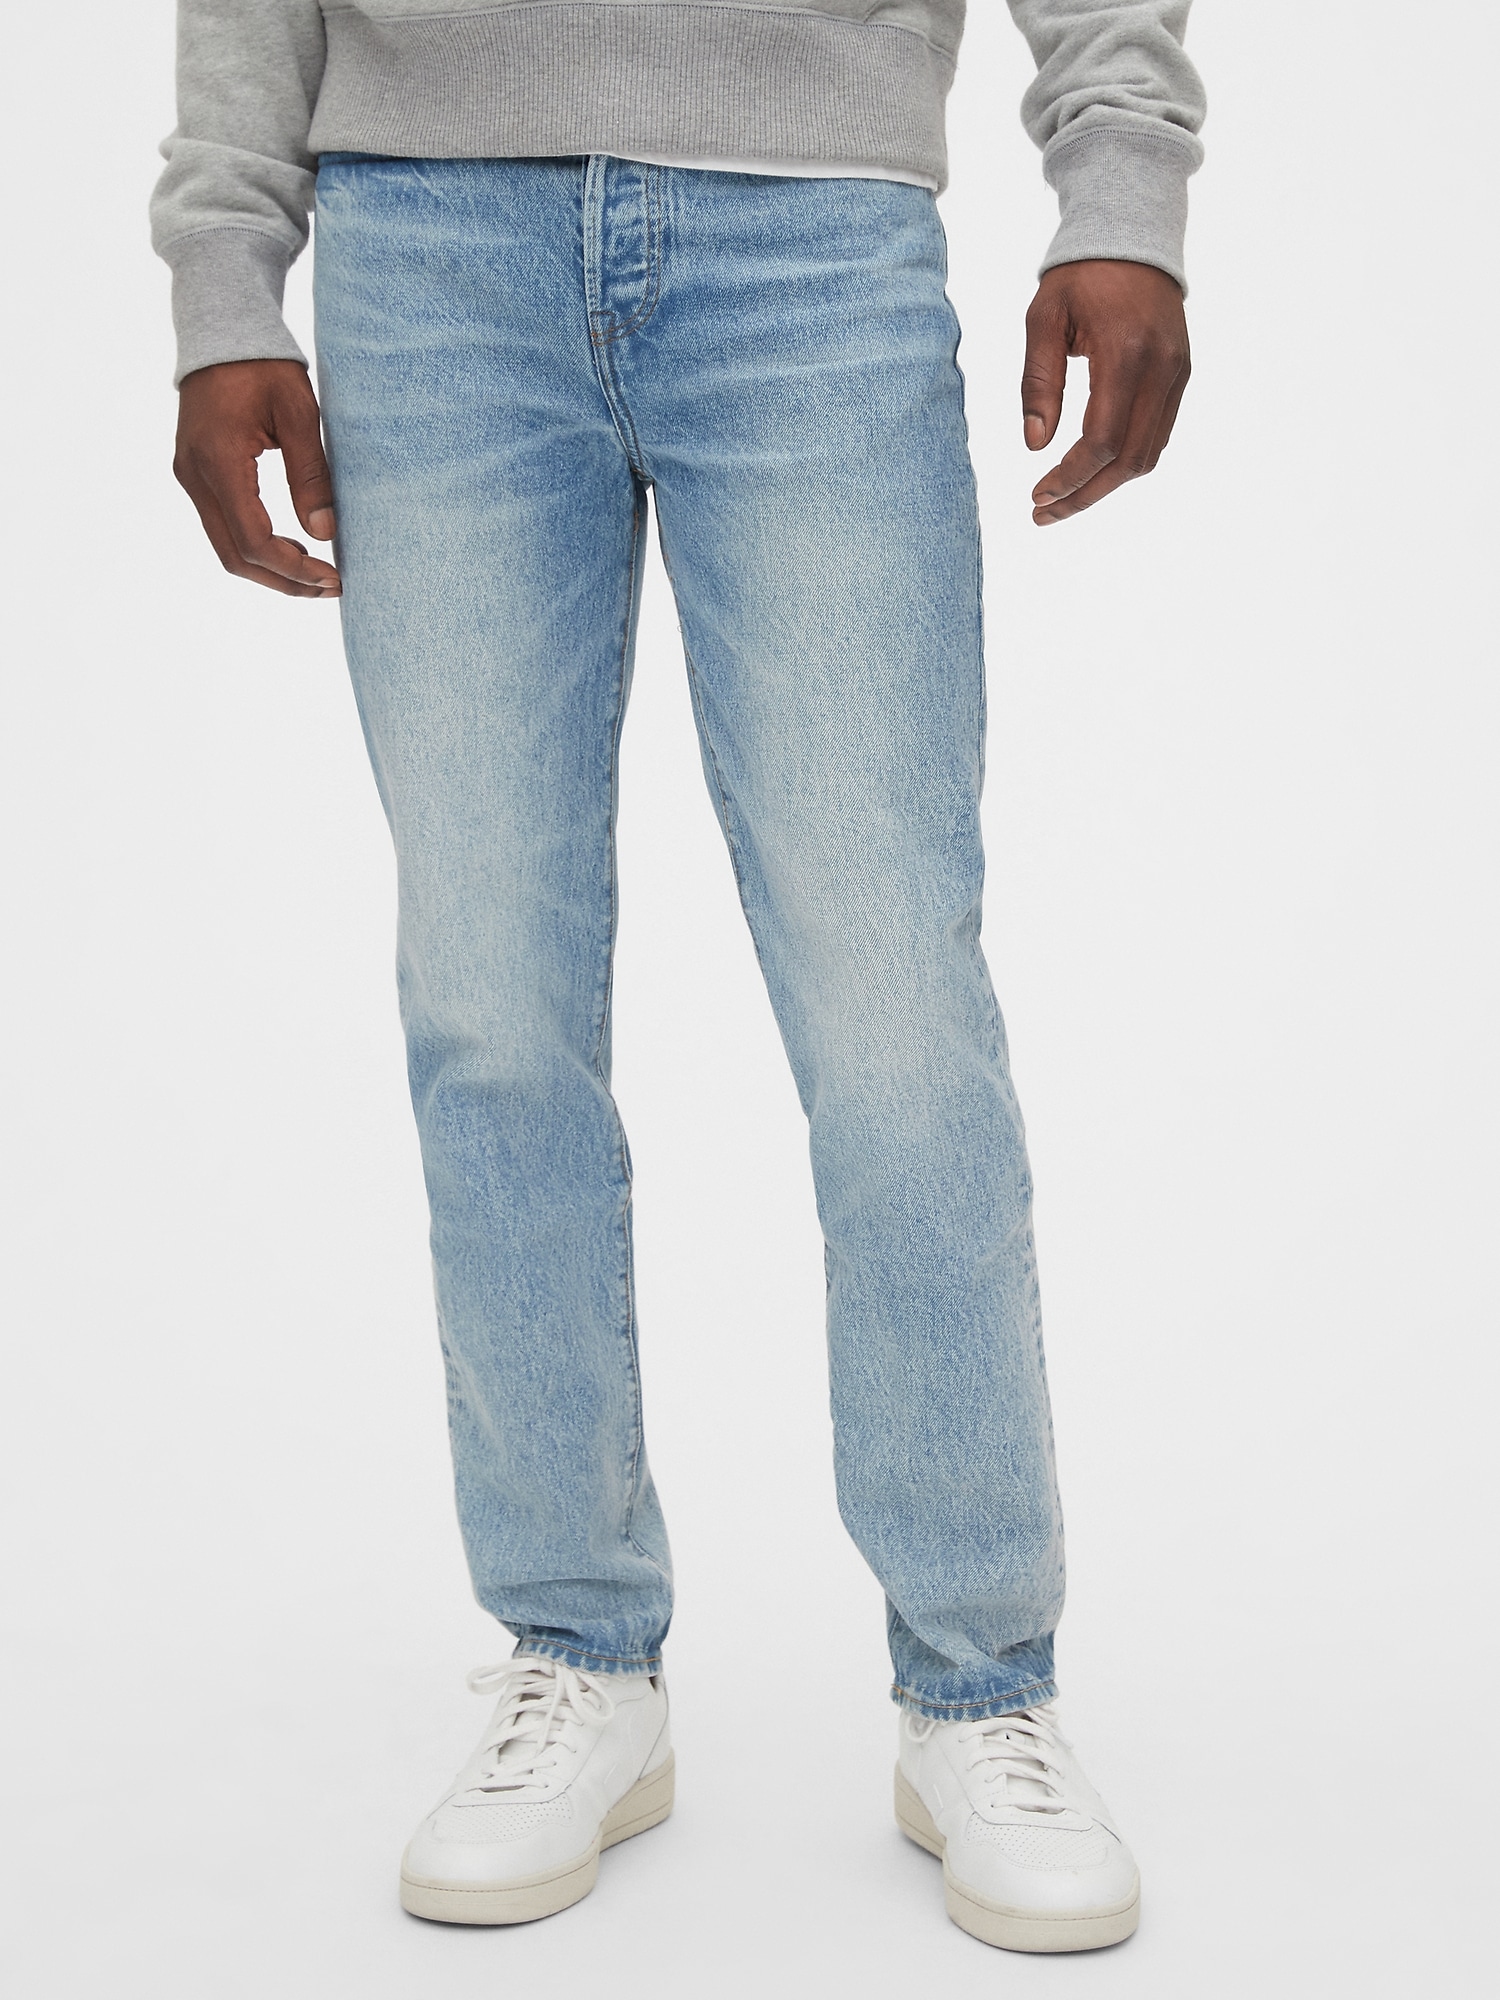 wat is tapered jeans